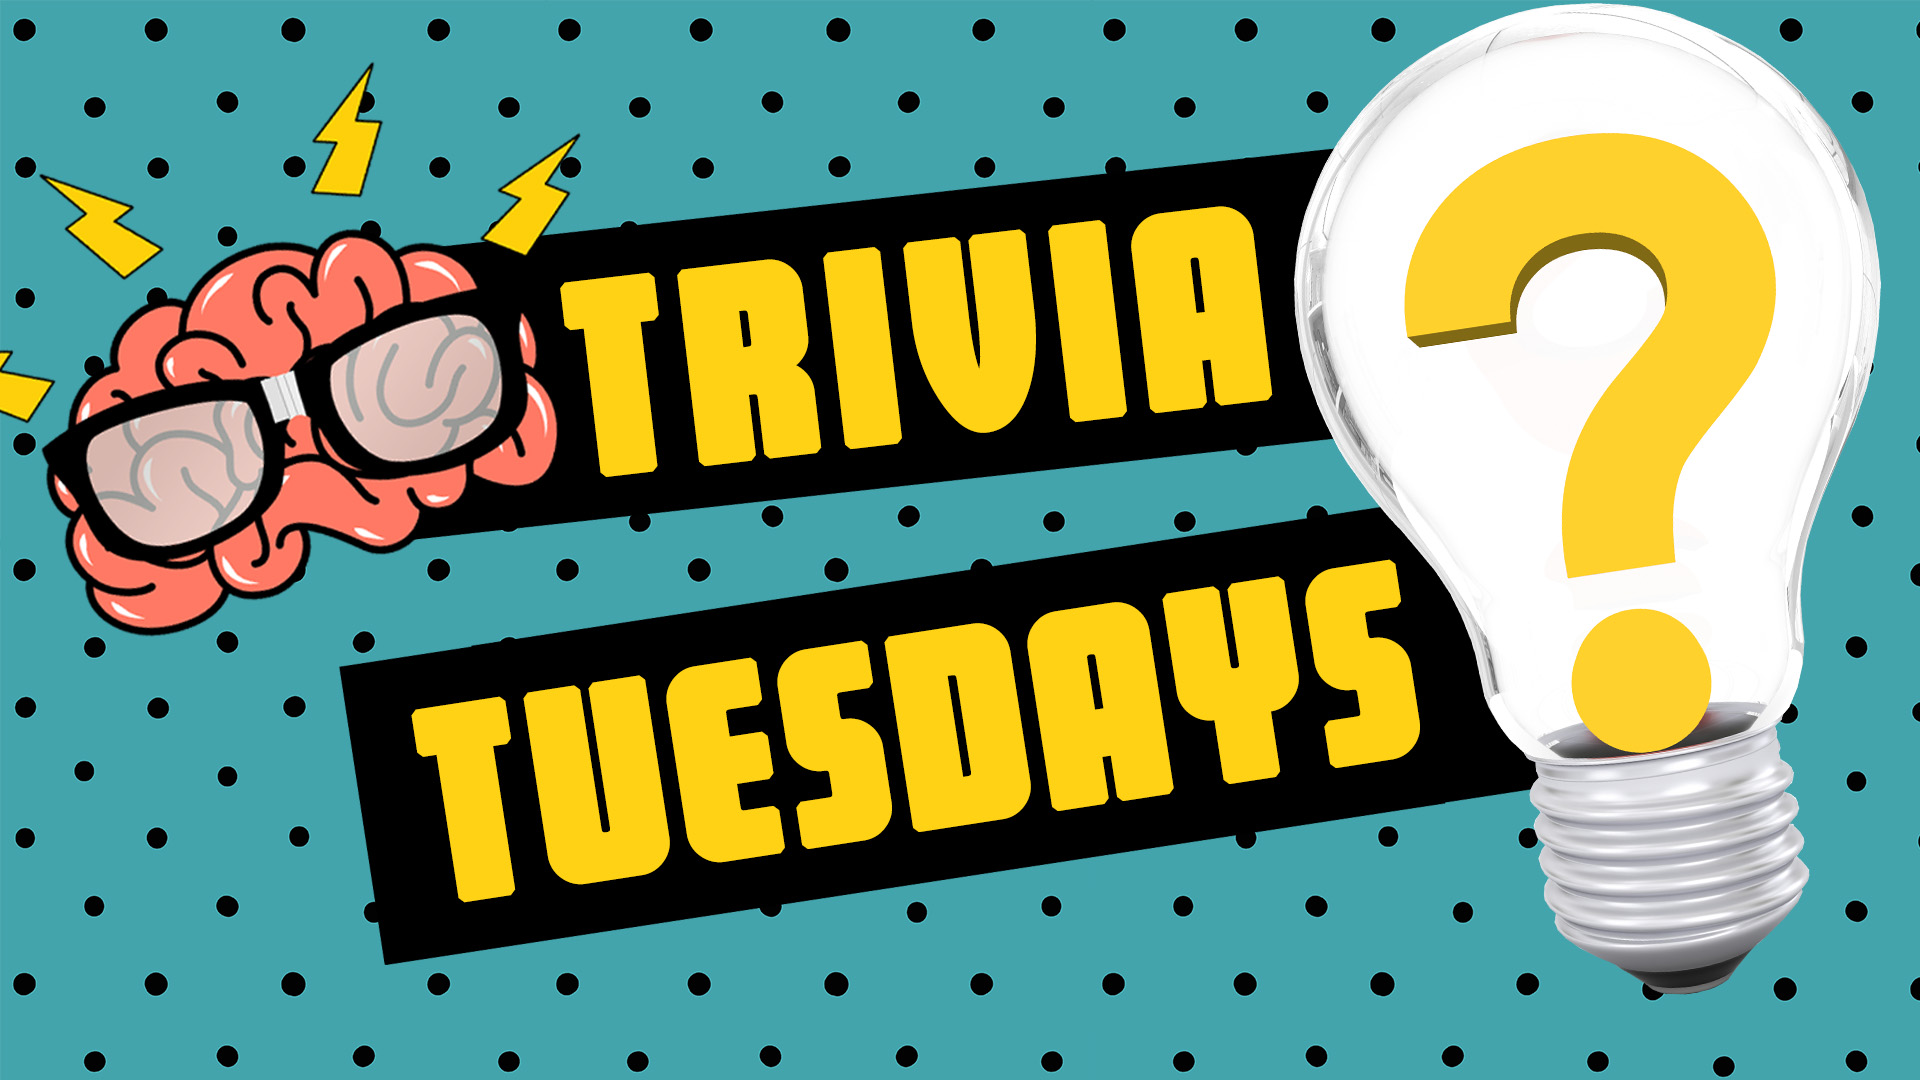 Images says Trivia Tuesdays in yellow text with a brain wearing glasses beside the T in Trivia. A light bulb with a question mark is on the right side, and the background is teal with black polka dots.